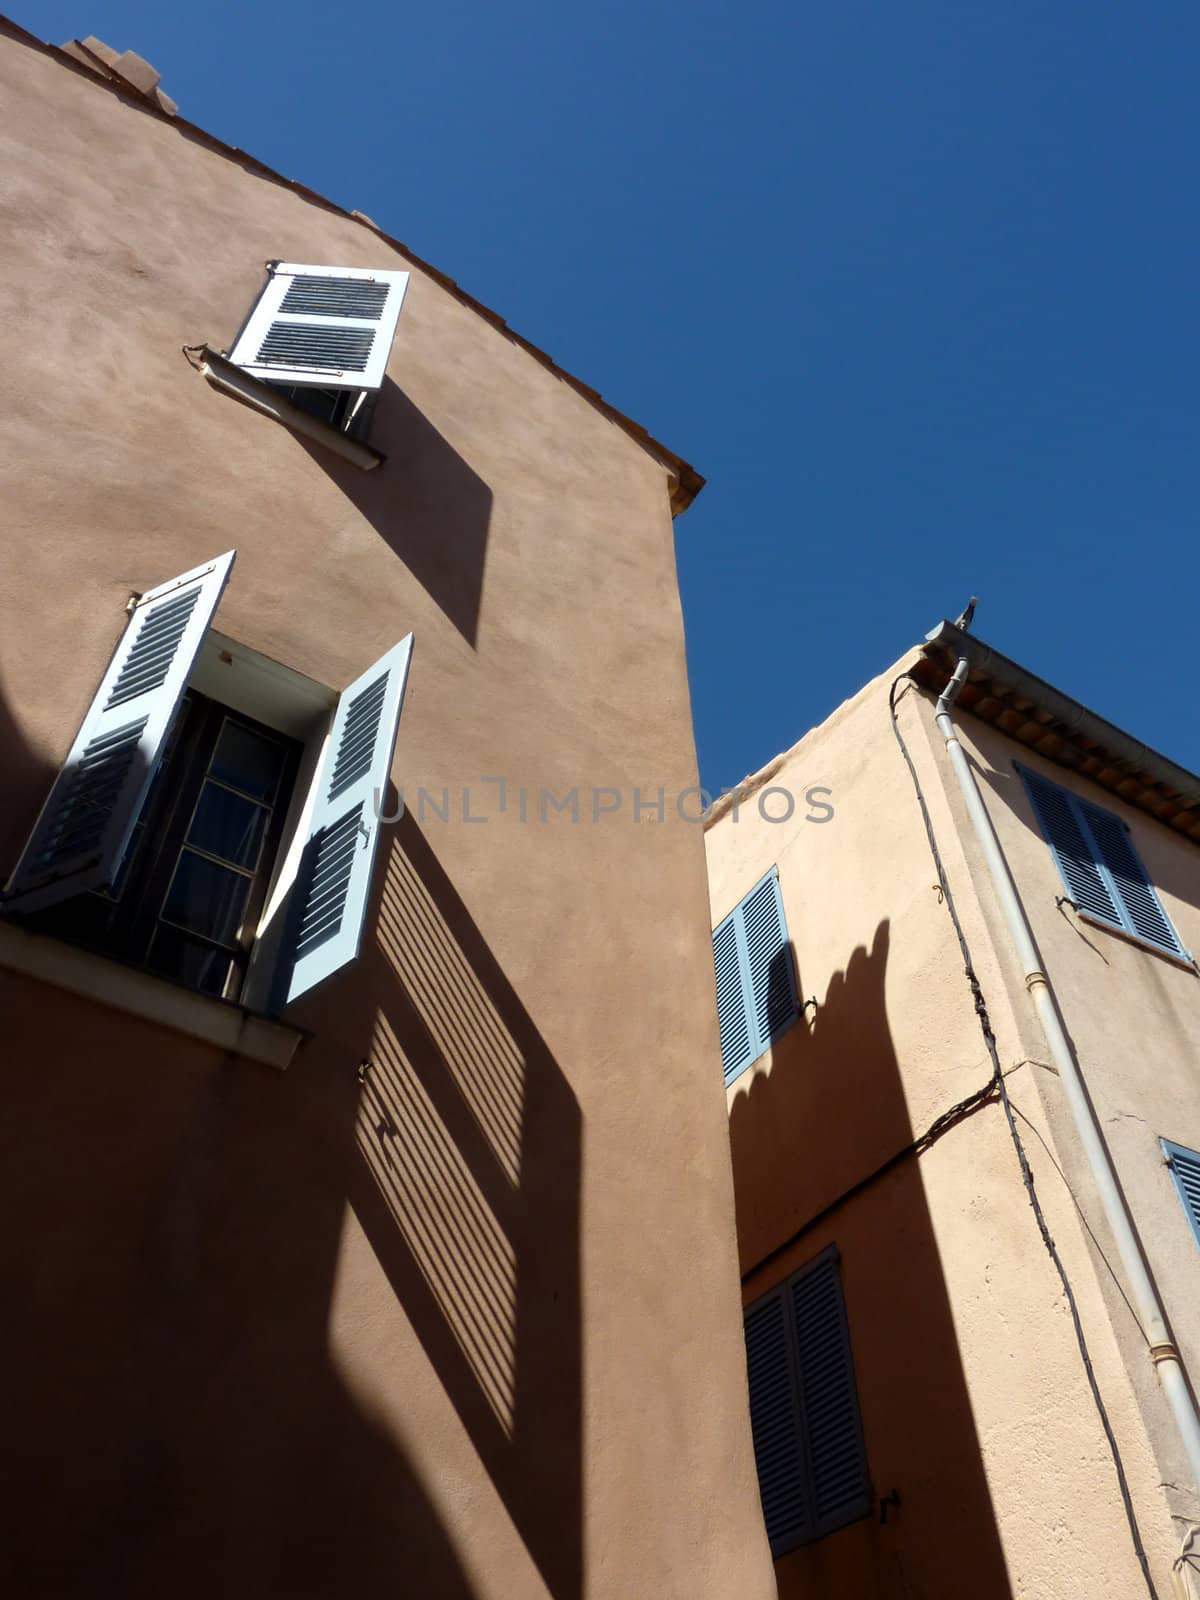 Houses and shutters in Saint-Tropez, France by Elenaphotos21